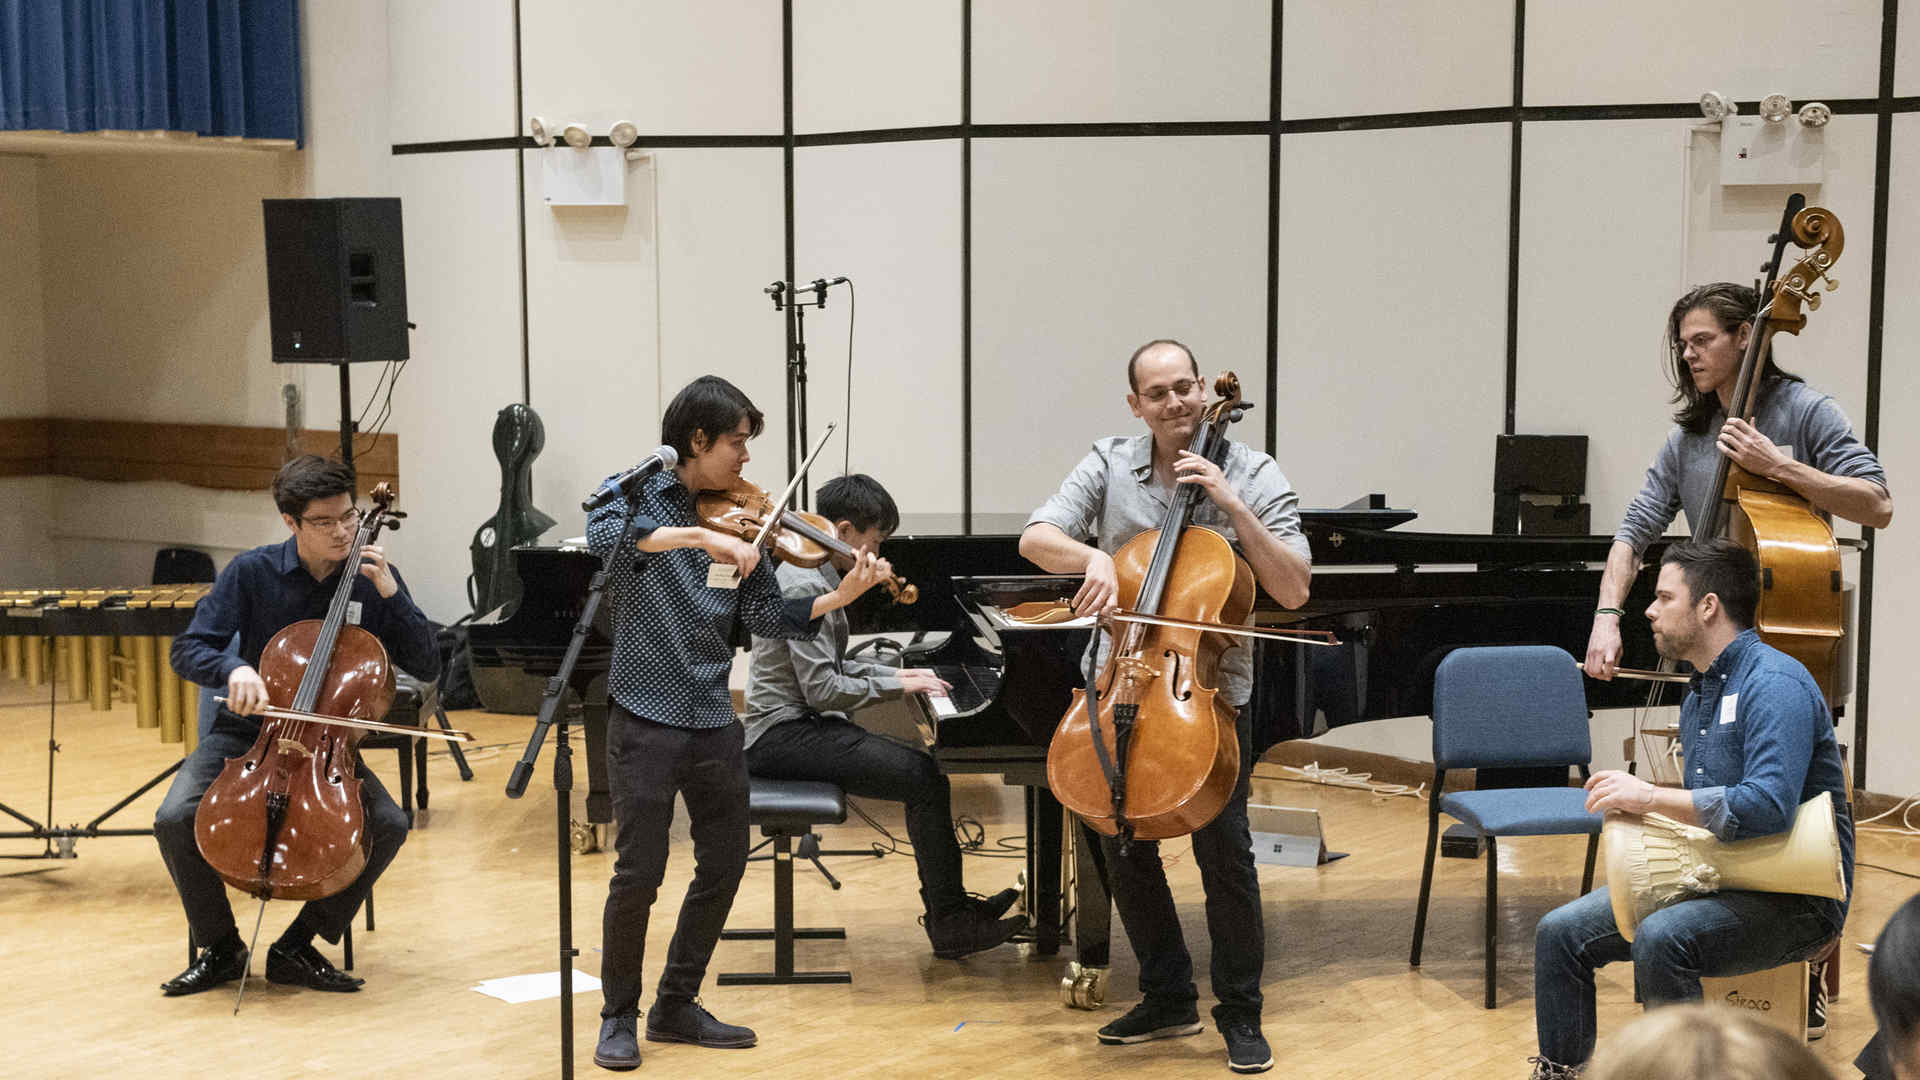 Alumnus Mike Block plays his cello while jamming with students and alums